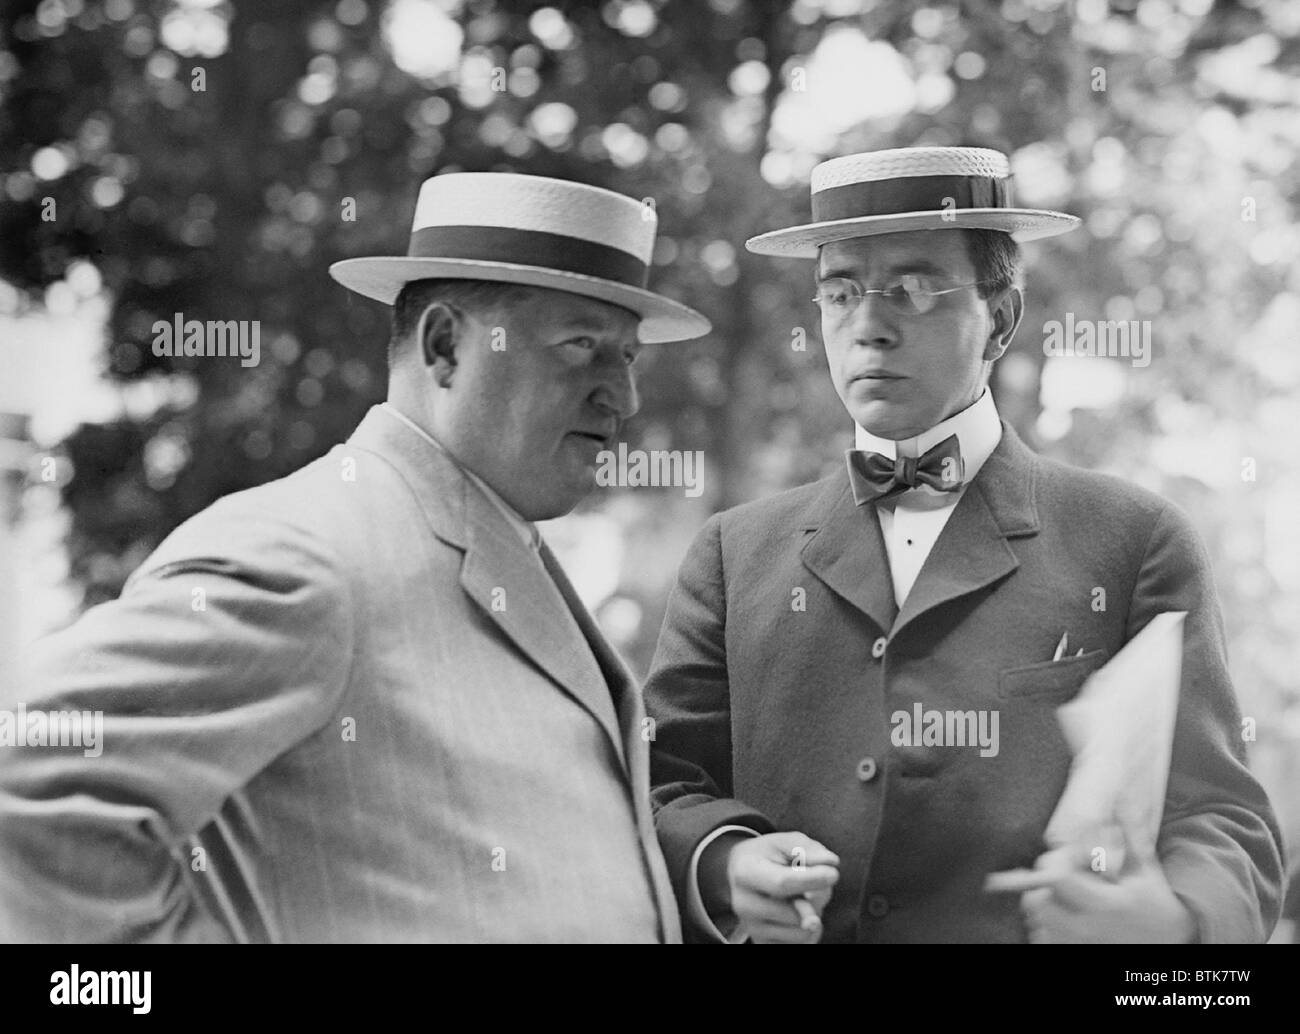 Harry Thaw (1871-1947), accompanied a man, possibly one of his lawyers, in New York during his trial for the murder of architect Stanford White. 1909. Thaw was portrayed by Robert Joy in RAGTIME, 1981. Stock Photo